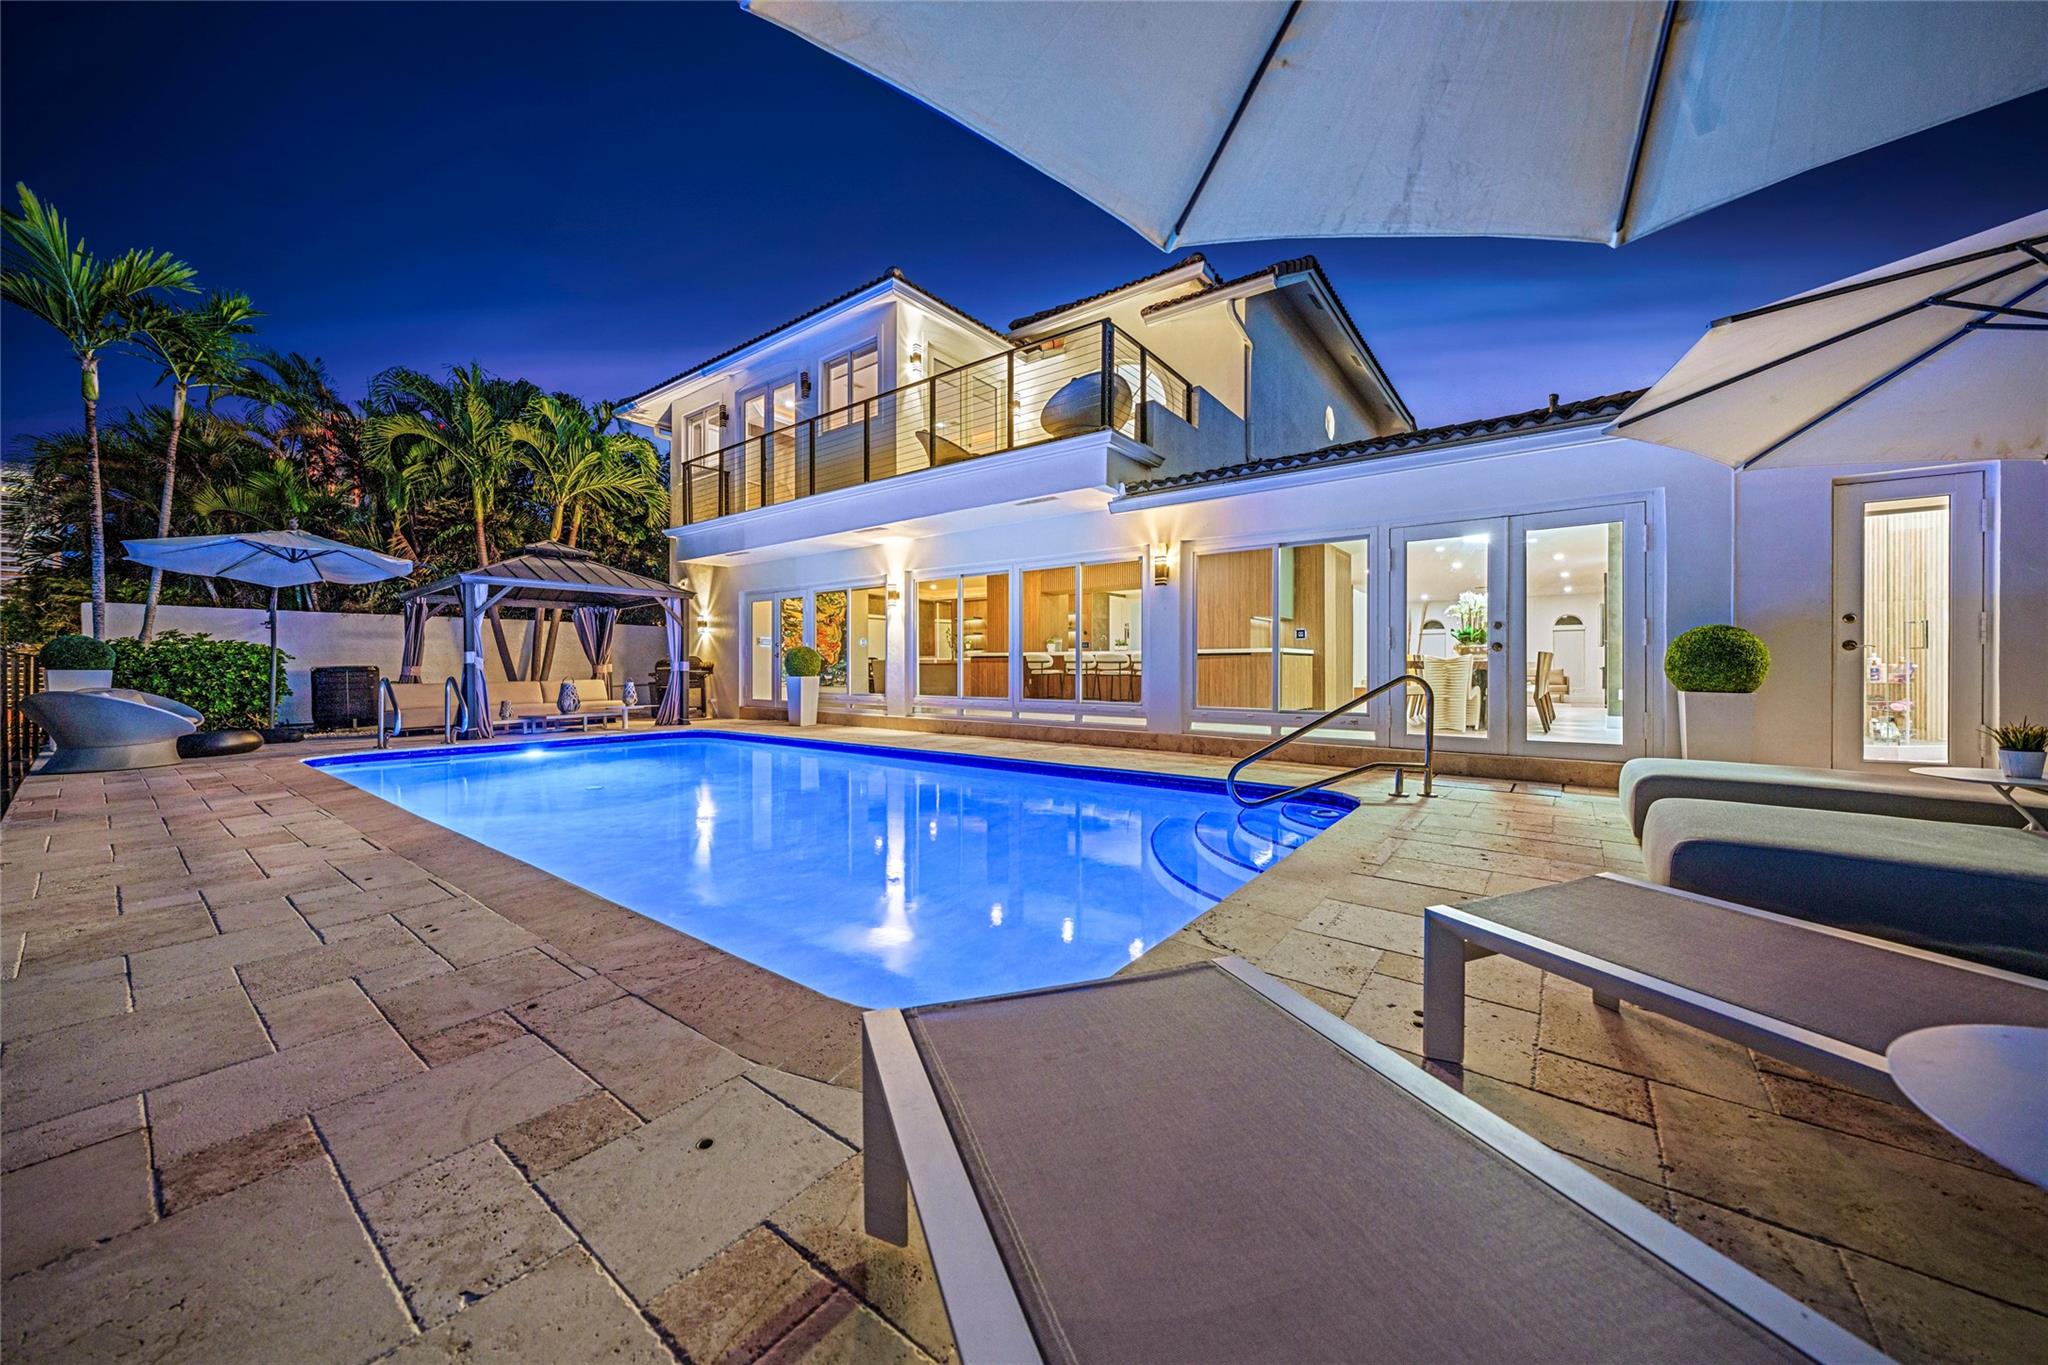 Nestled within Ft. Lauderdale's exclusive Castle Harbor Isle, this waterfront gem features an 80 dock, a fully remodeled interior, and over 4,000 sq ft to enjoy. This property is being sold as a LUXURY PACKAGE that includes a 2023 Ferrari F8 Spider, custom 2017 Harley Davidson Night Rod Special 1250 cc, 2 Yamaha Jet-skis, a Tidewater 280 boat, and all the furniture in the home.  Spacious floor plan, including a grand 2-story foyer, a kitchen overlooking the pool and intercoastal, jacuzzi, and an oversized balcony. Upstairs, the master suite offers a walk-in closet and a master bathroom worthy of a 5 star spa. Excellent location near the beach, dining, shops, major roadways, and the airport. Boater's dream with ocean access, no fixed bridges, minutes from Hillsboro Inlet!